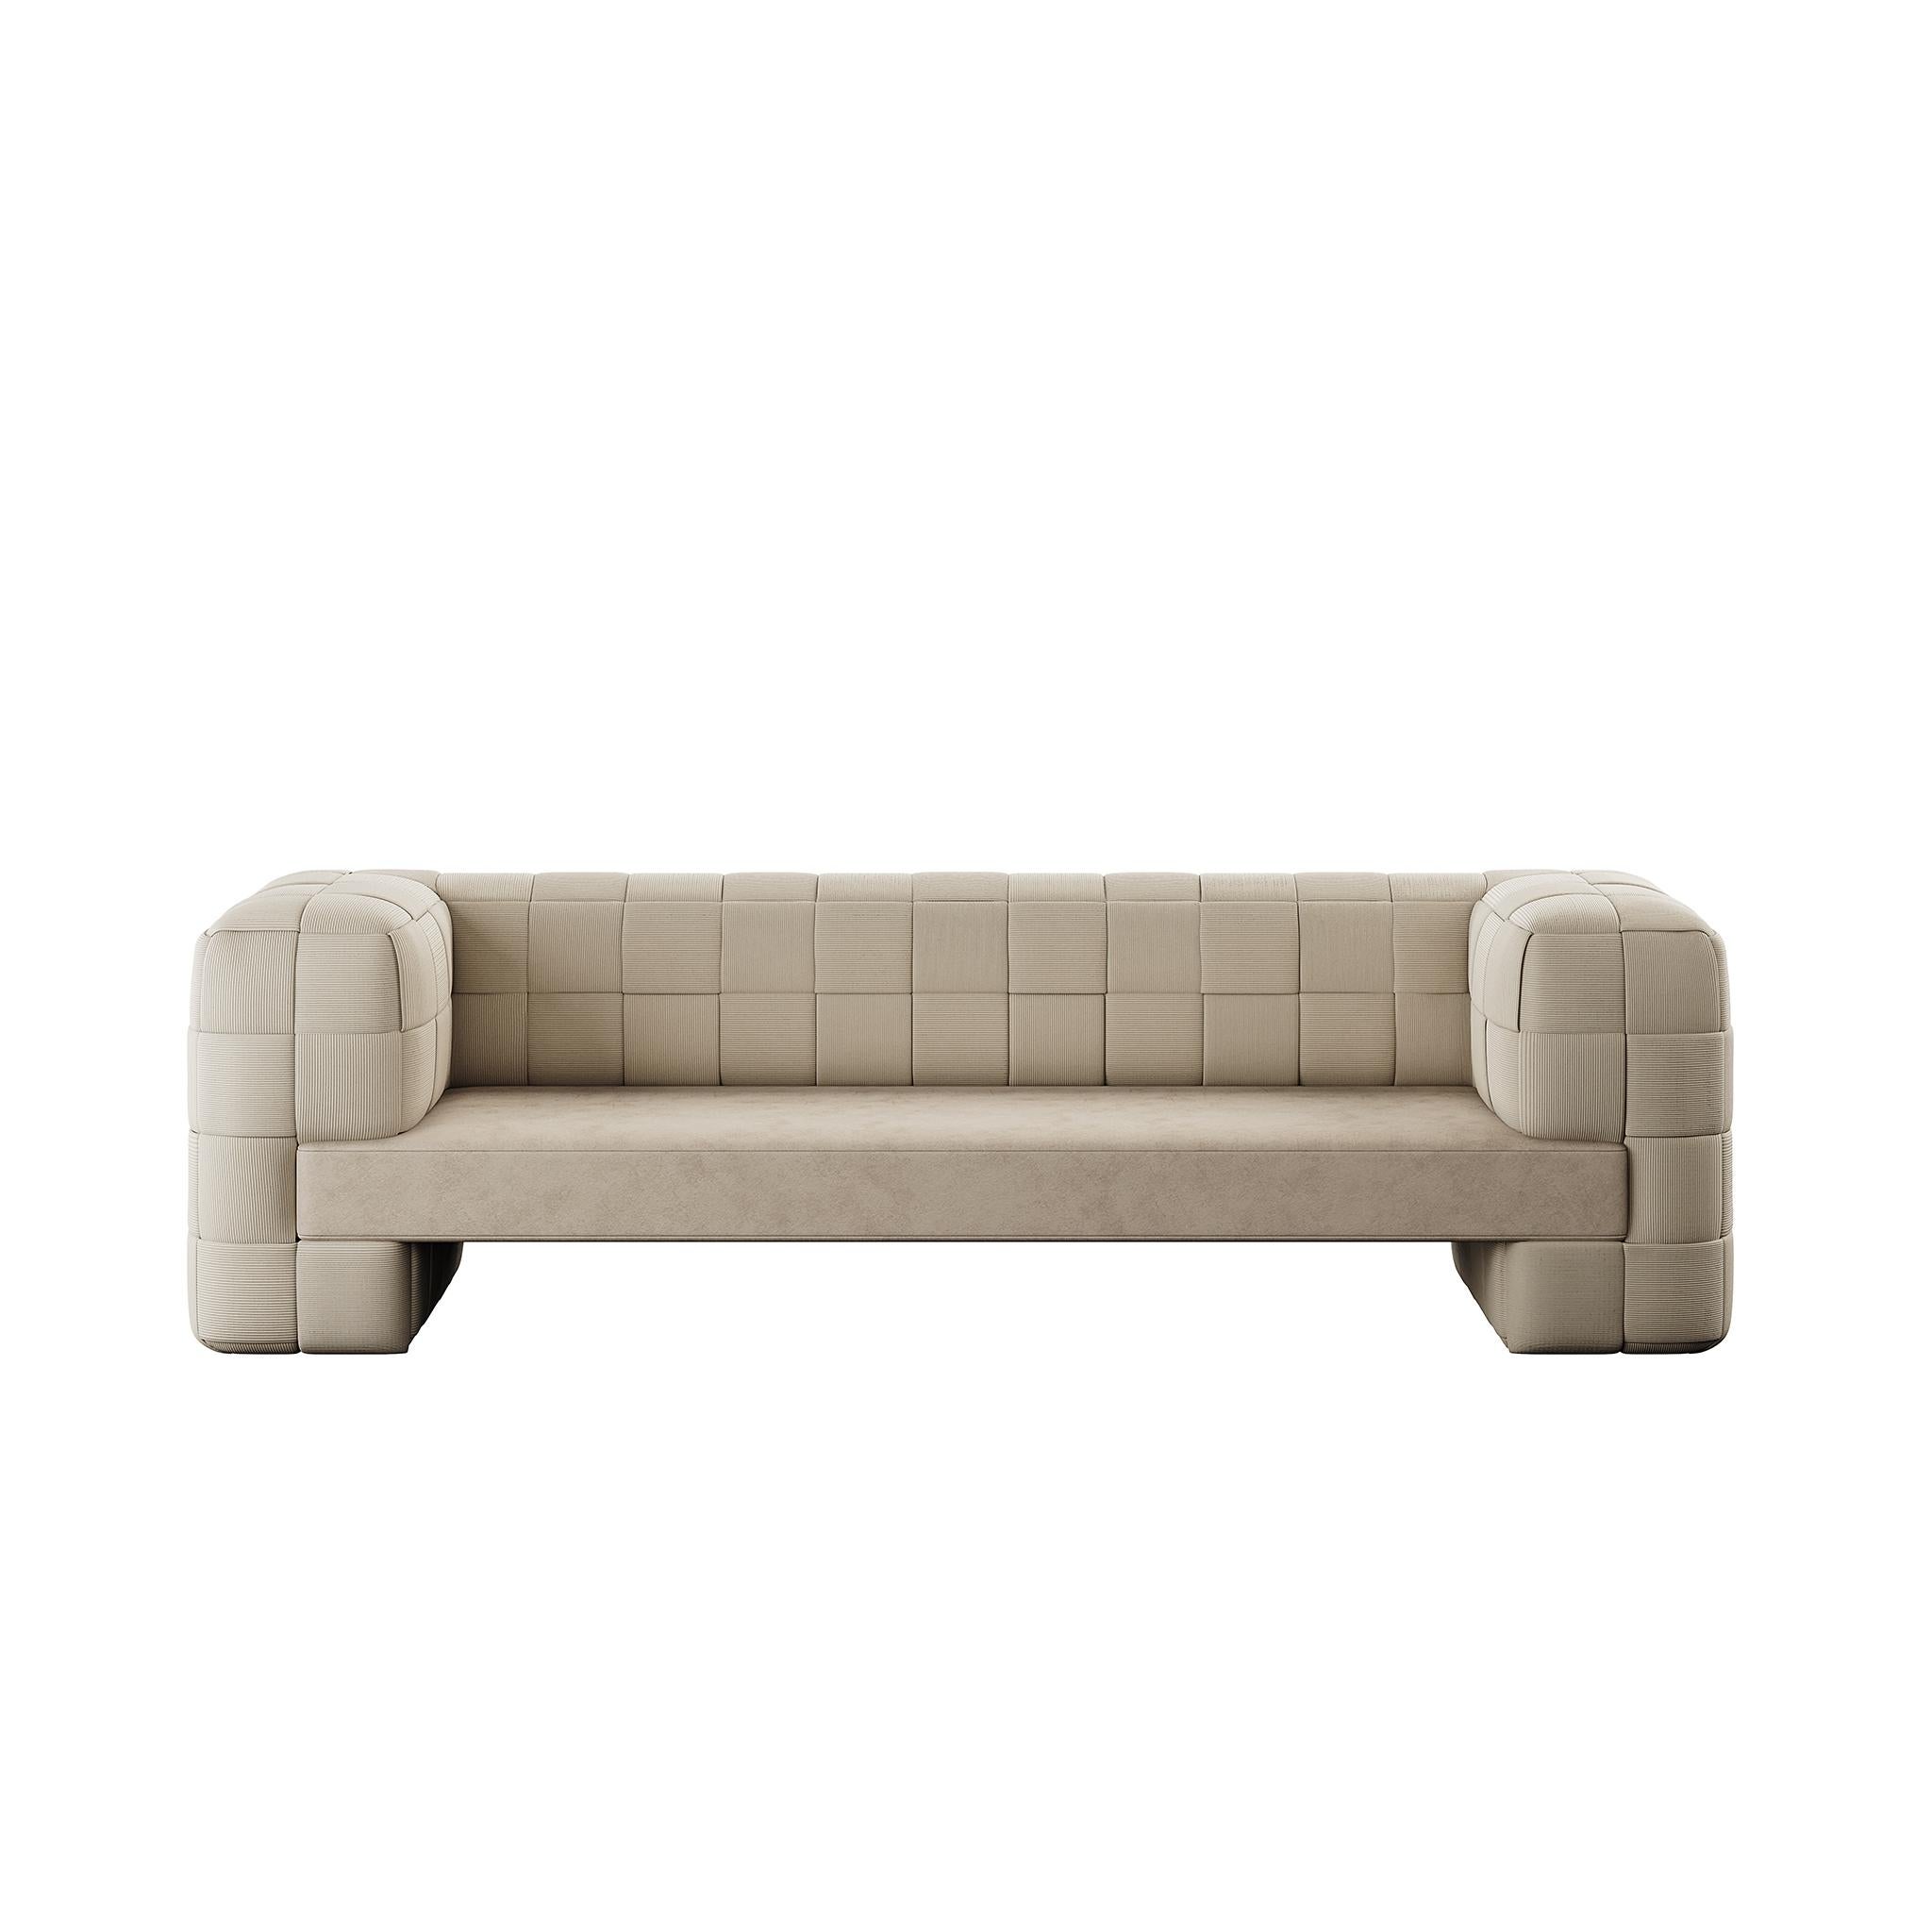 Indulge in the warmth of comfort and style with our Full Upholstered Sofa in Light Brown Corduroy.
This sofa isn’t just a piece of furniture; it’s an invitation to unwind in a haven of softness and timeless design.
Enveloped in a luxurious light